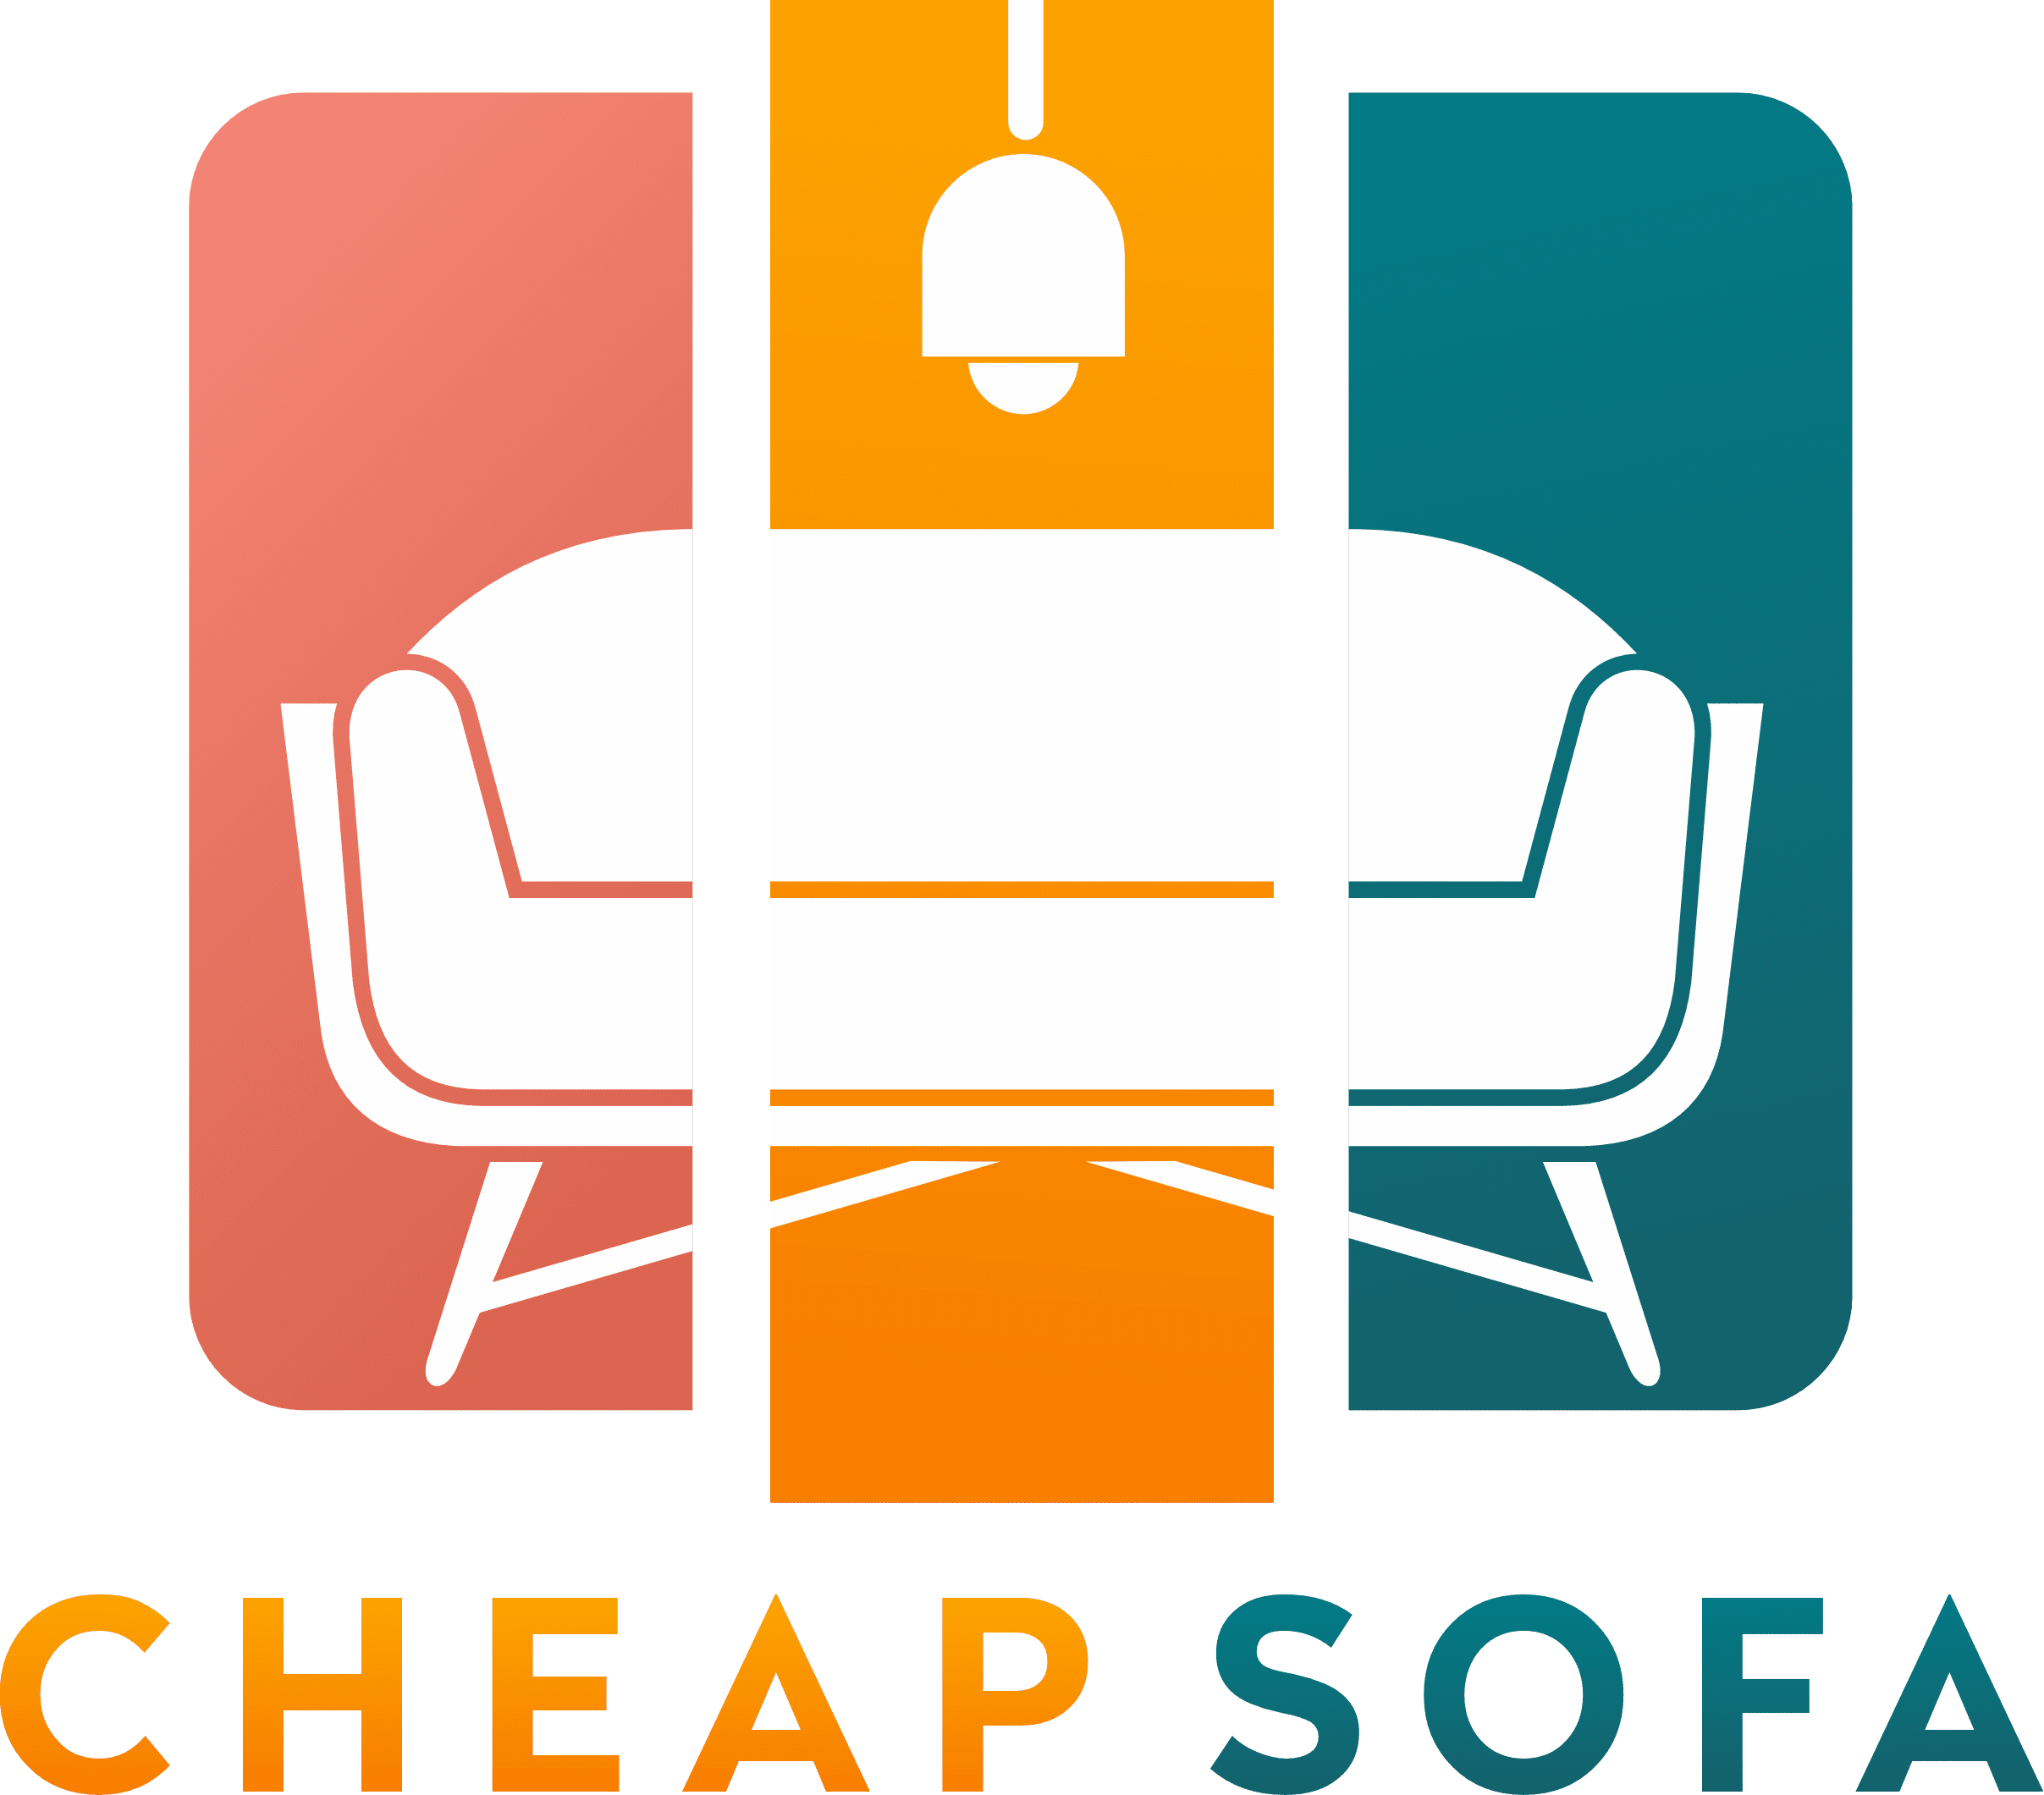 Affordable Luxury Sofas